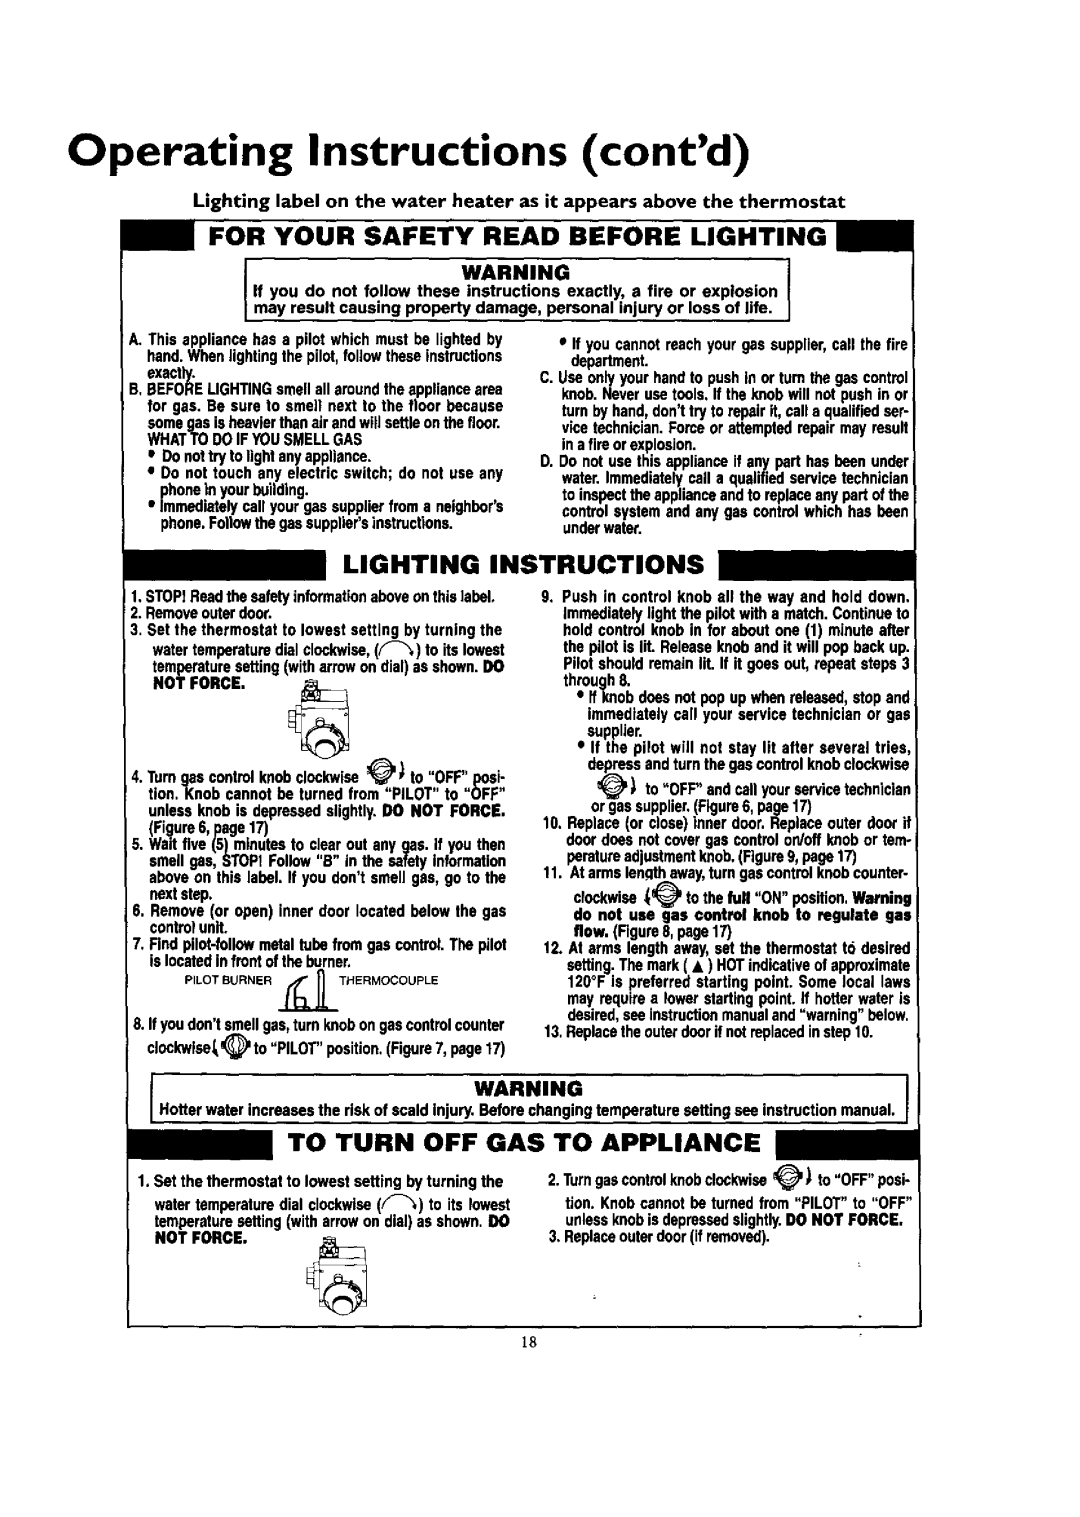 Kenmore 153.332318 Operating Instructions contd, For Your Safety Read Before Lighting, Lighting Instructions, exactly 